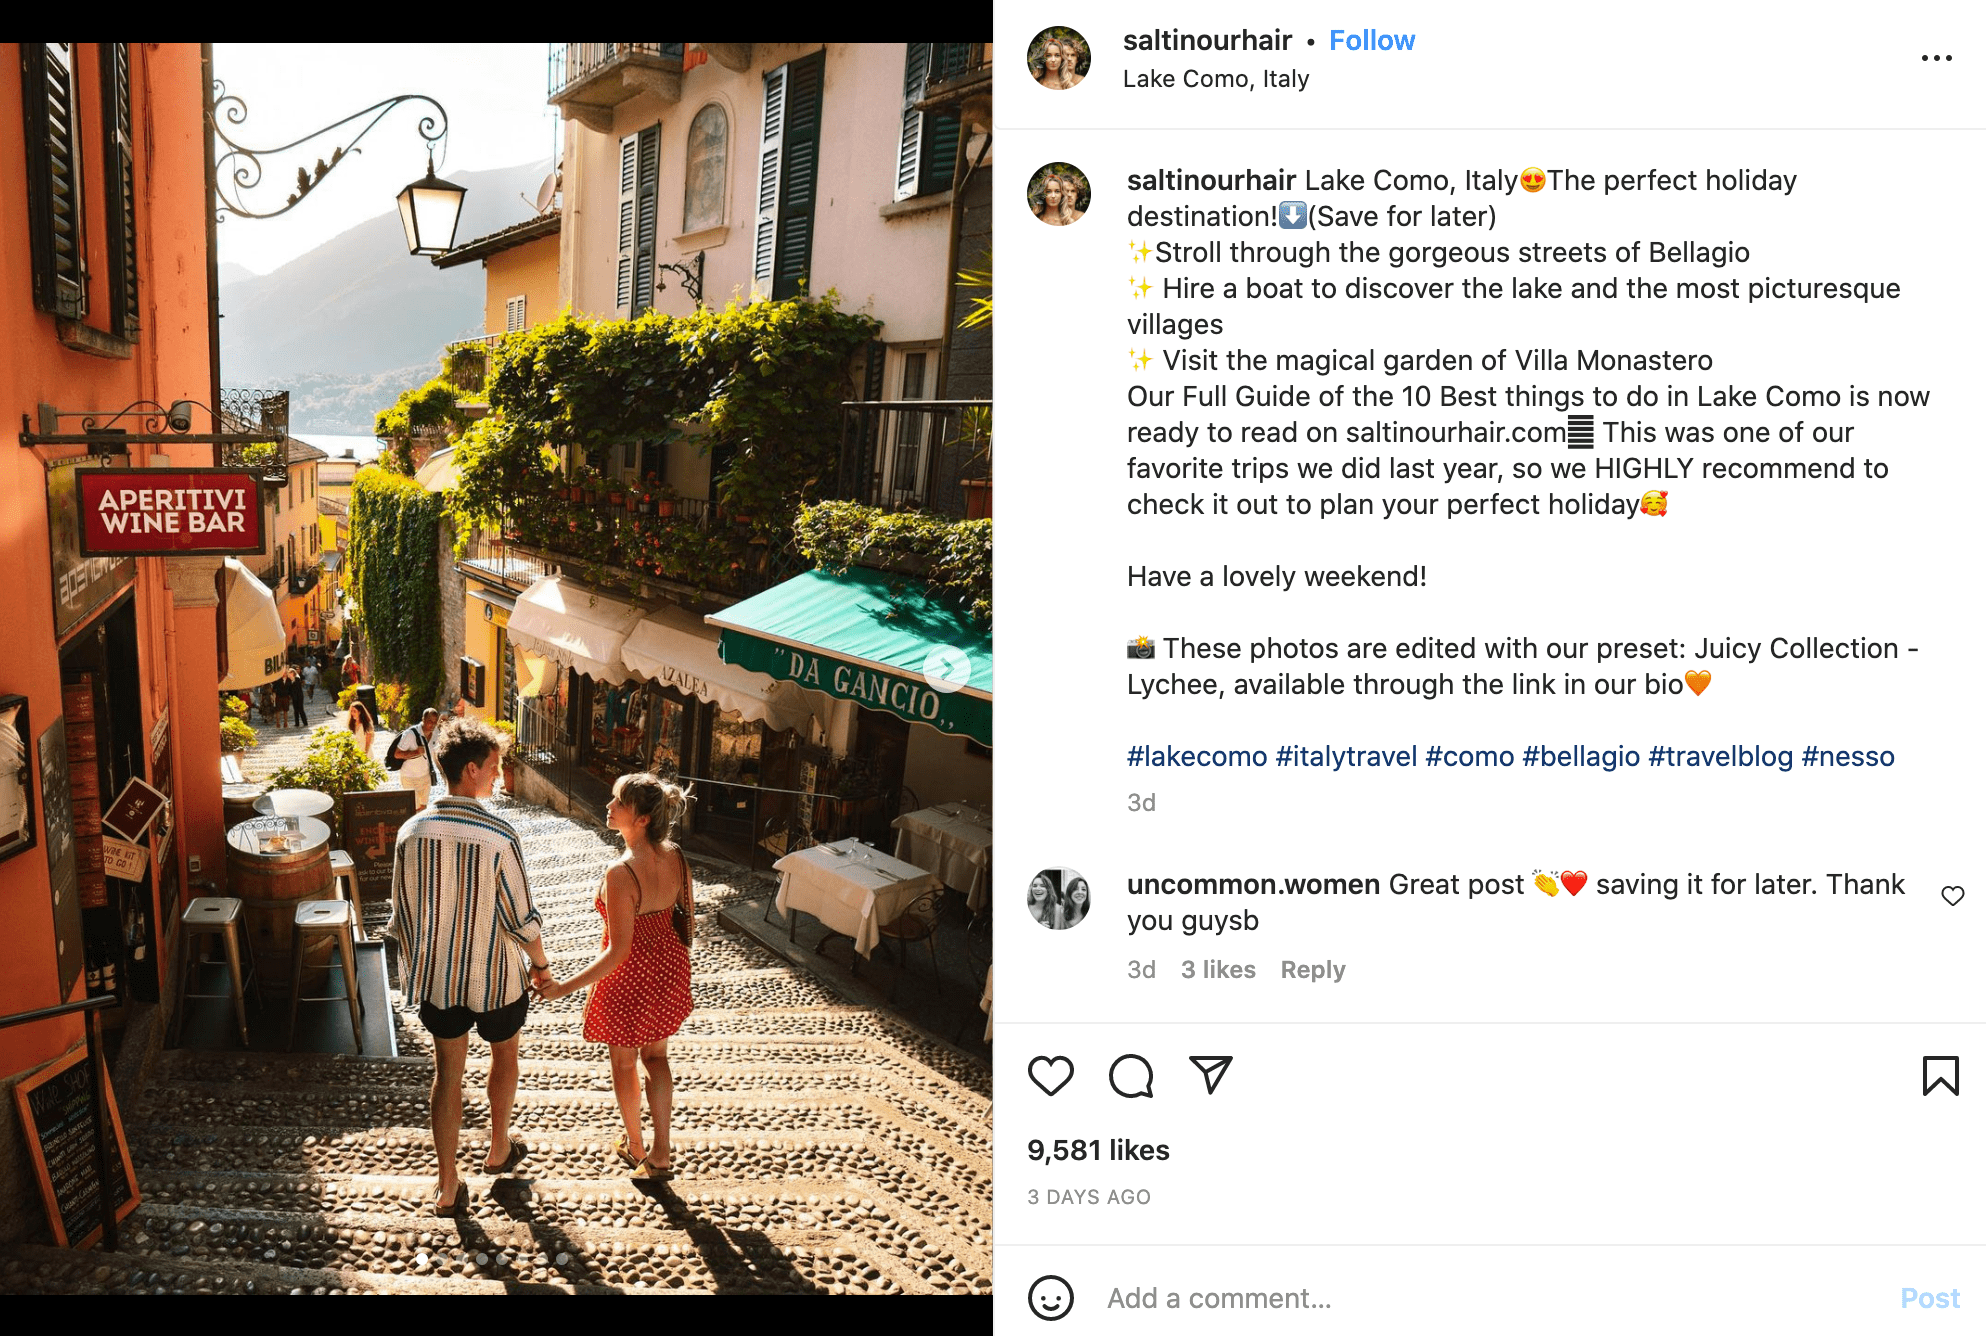 A screenshot of the saltinourhair Instagram travel blog featuring a photo of a couple in a town